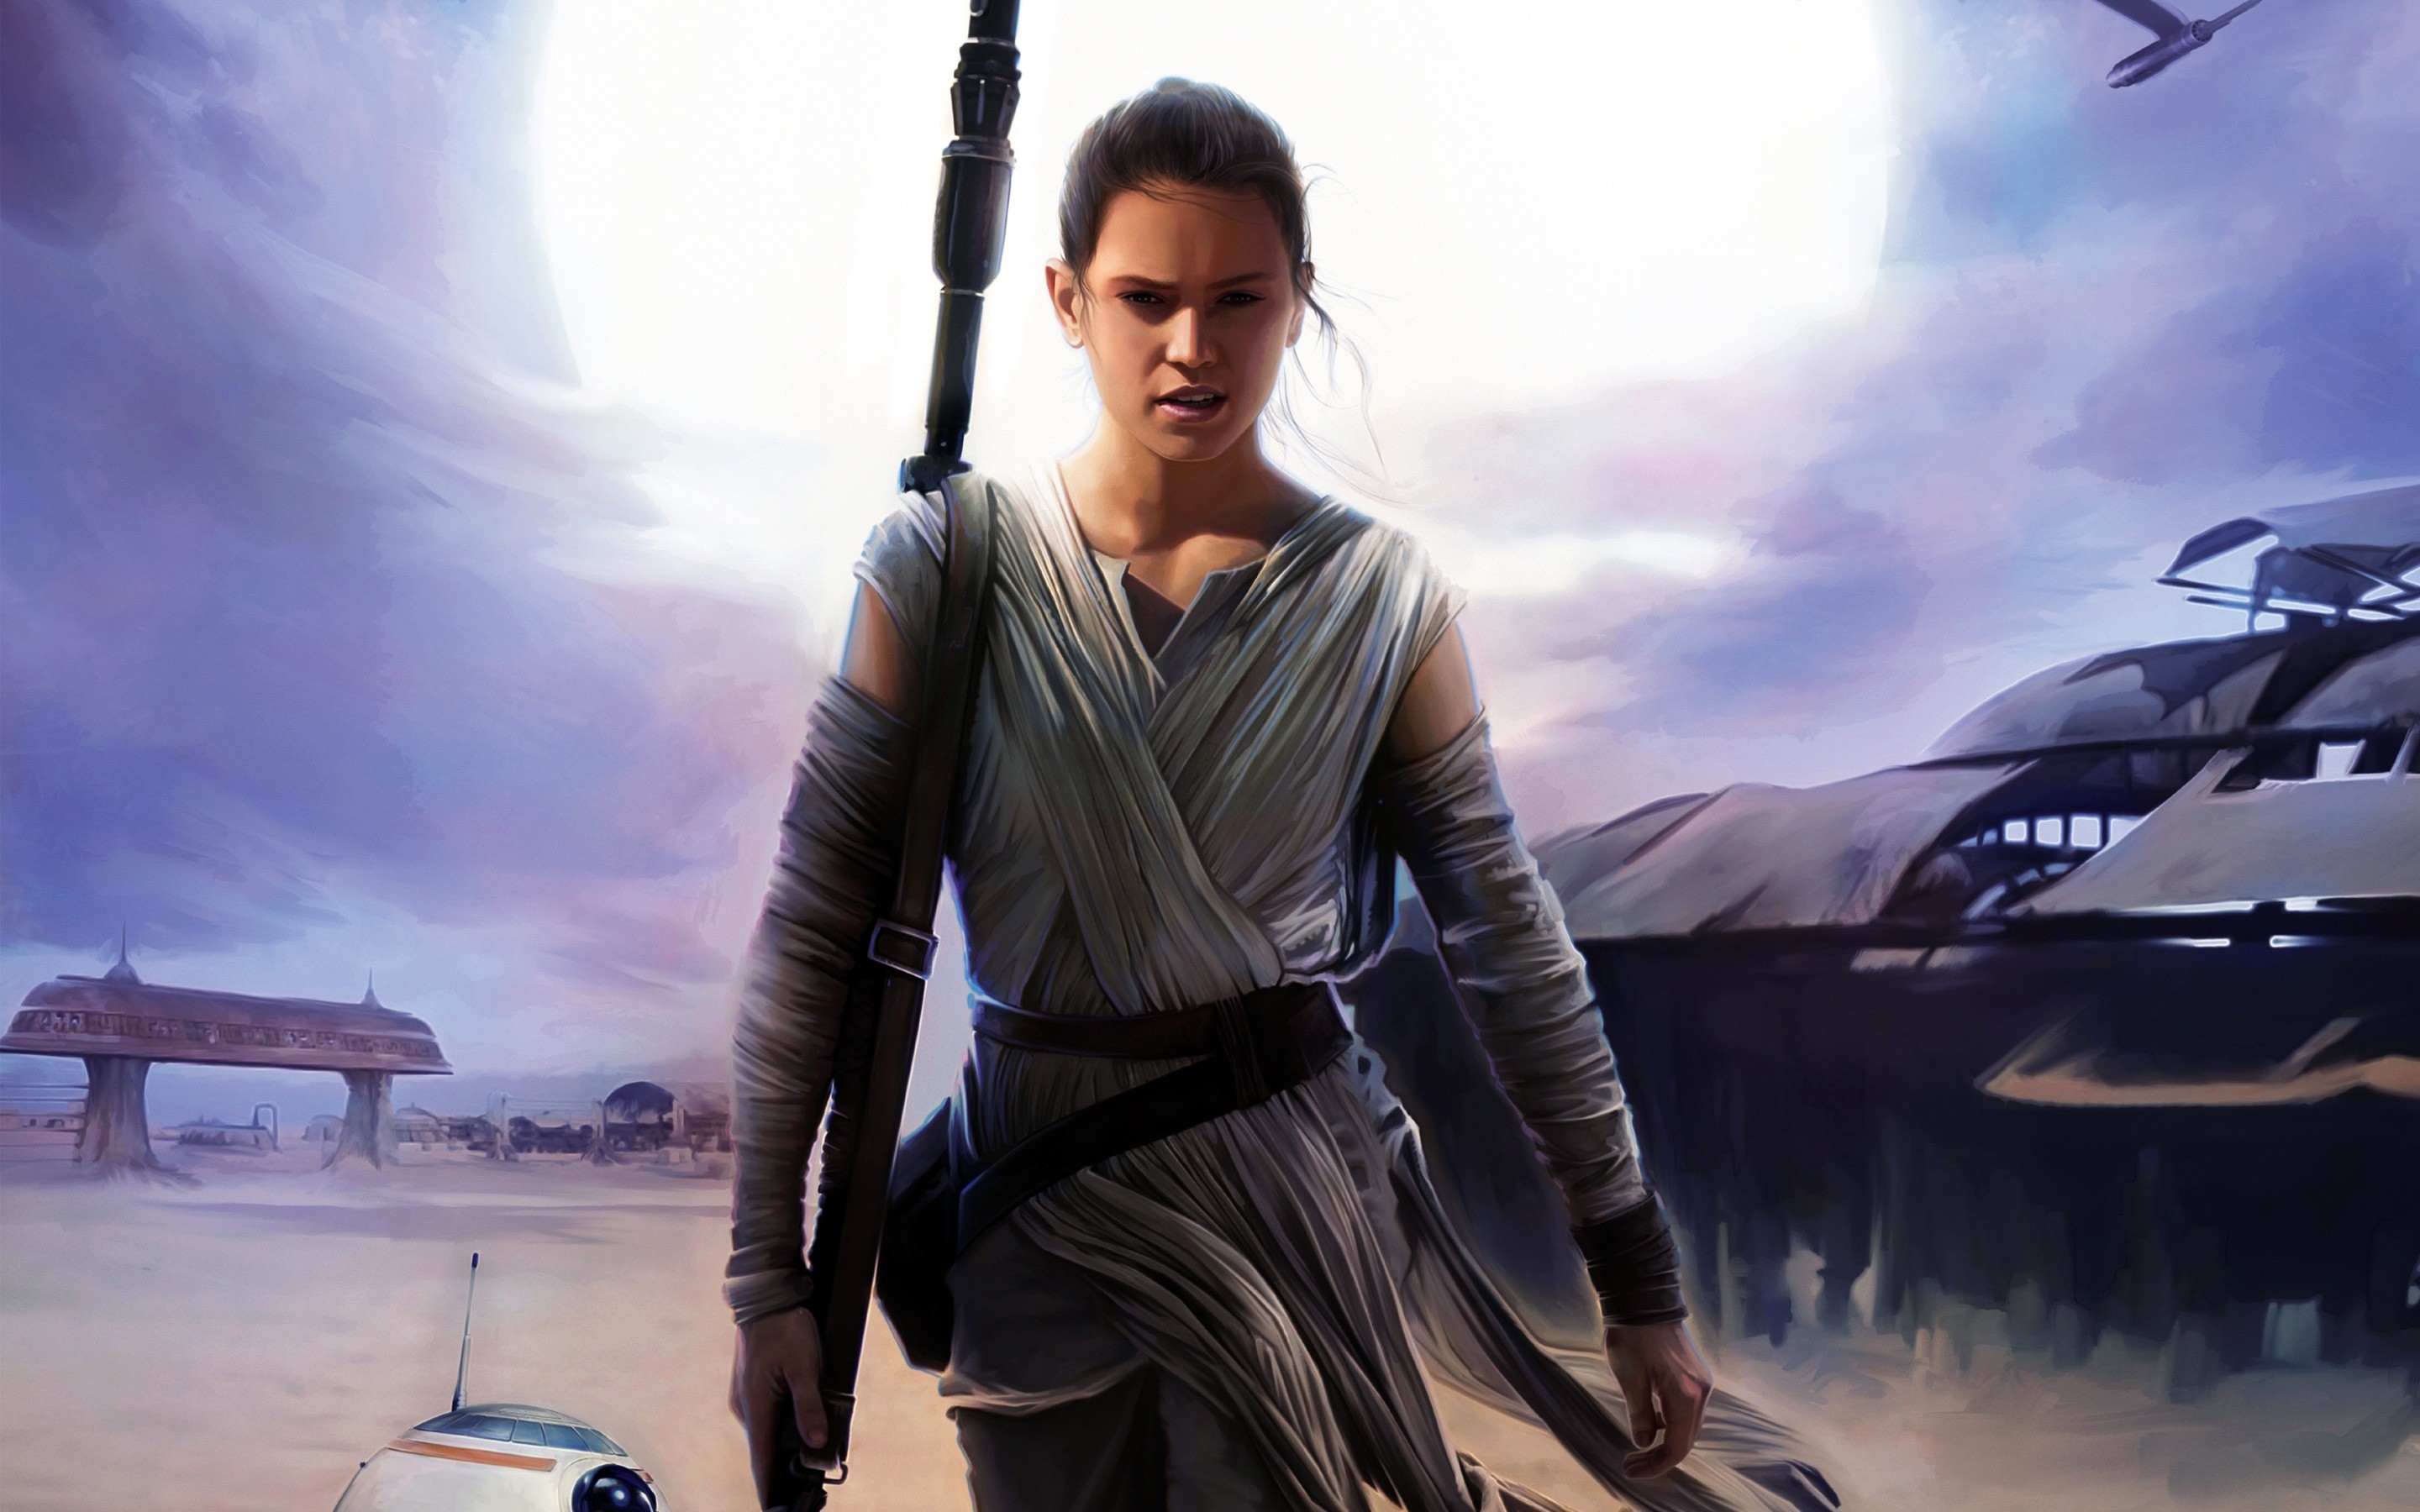 Star Wars Episode Vii The Force Awakens Daisy Ridley - Star Wars Rey Puzzle - HD Wallpaper 